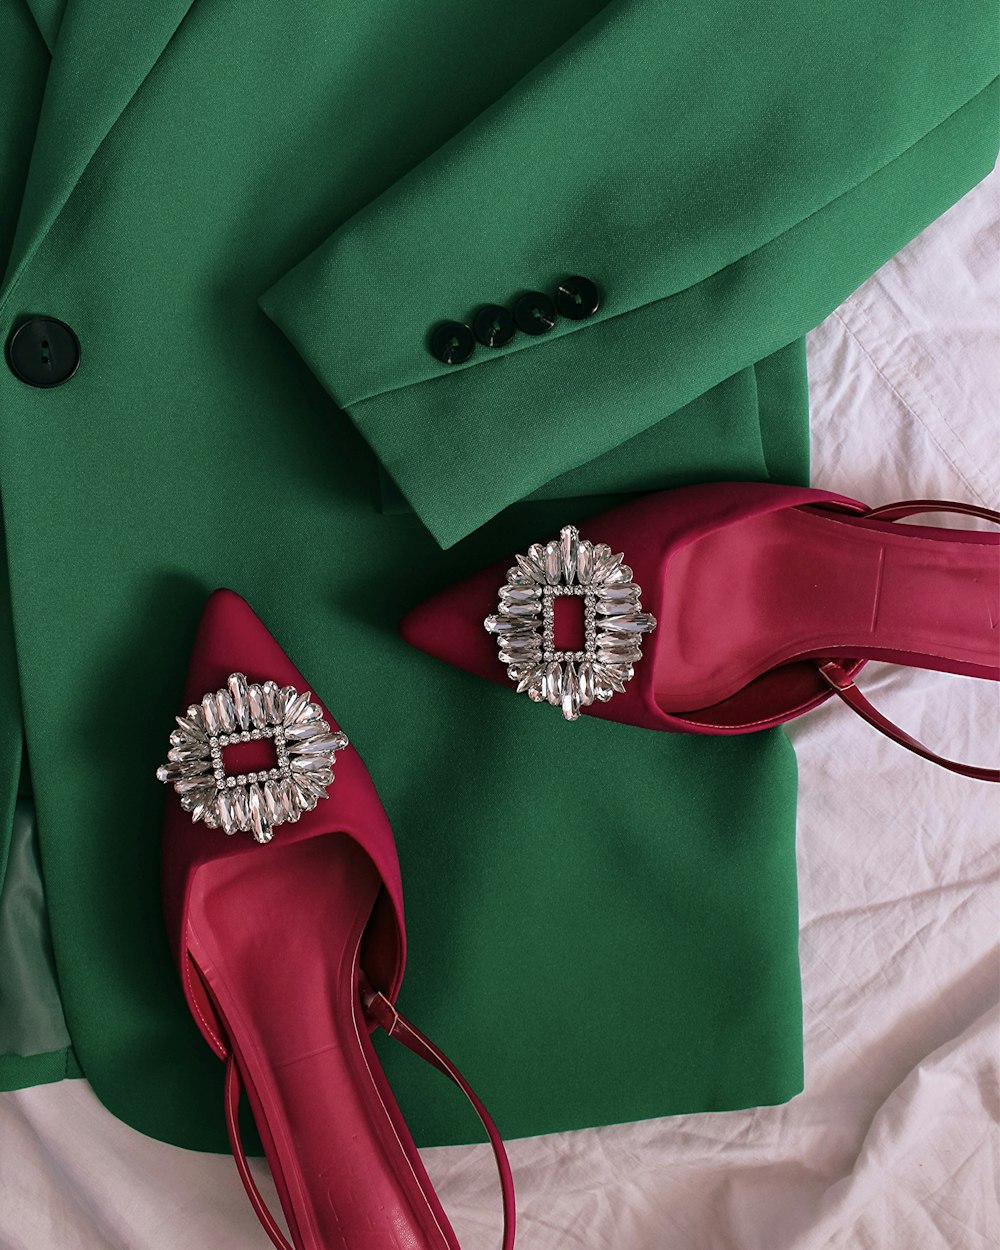 a pair of red high heels sitting on top of a green jacket